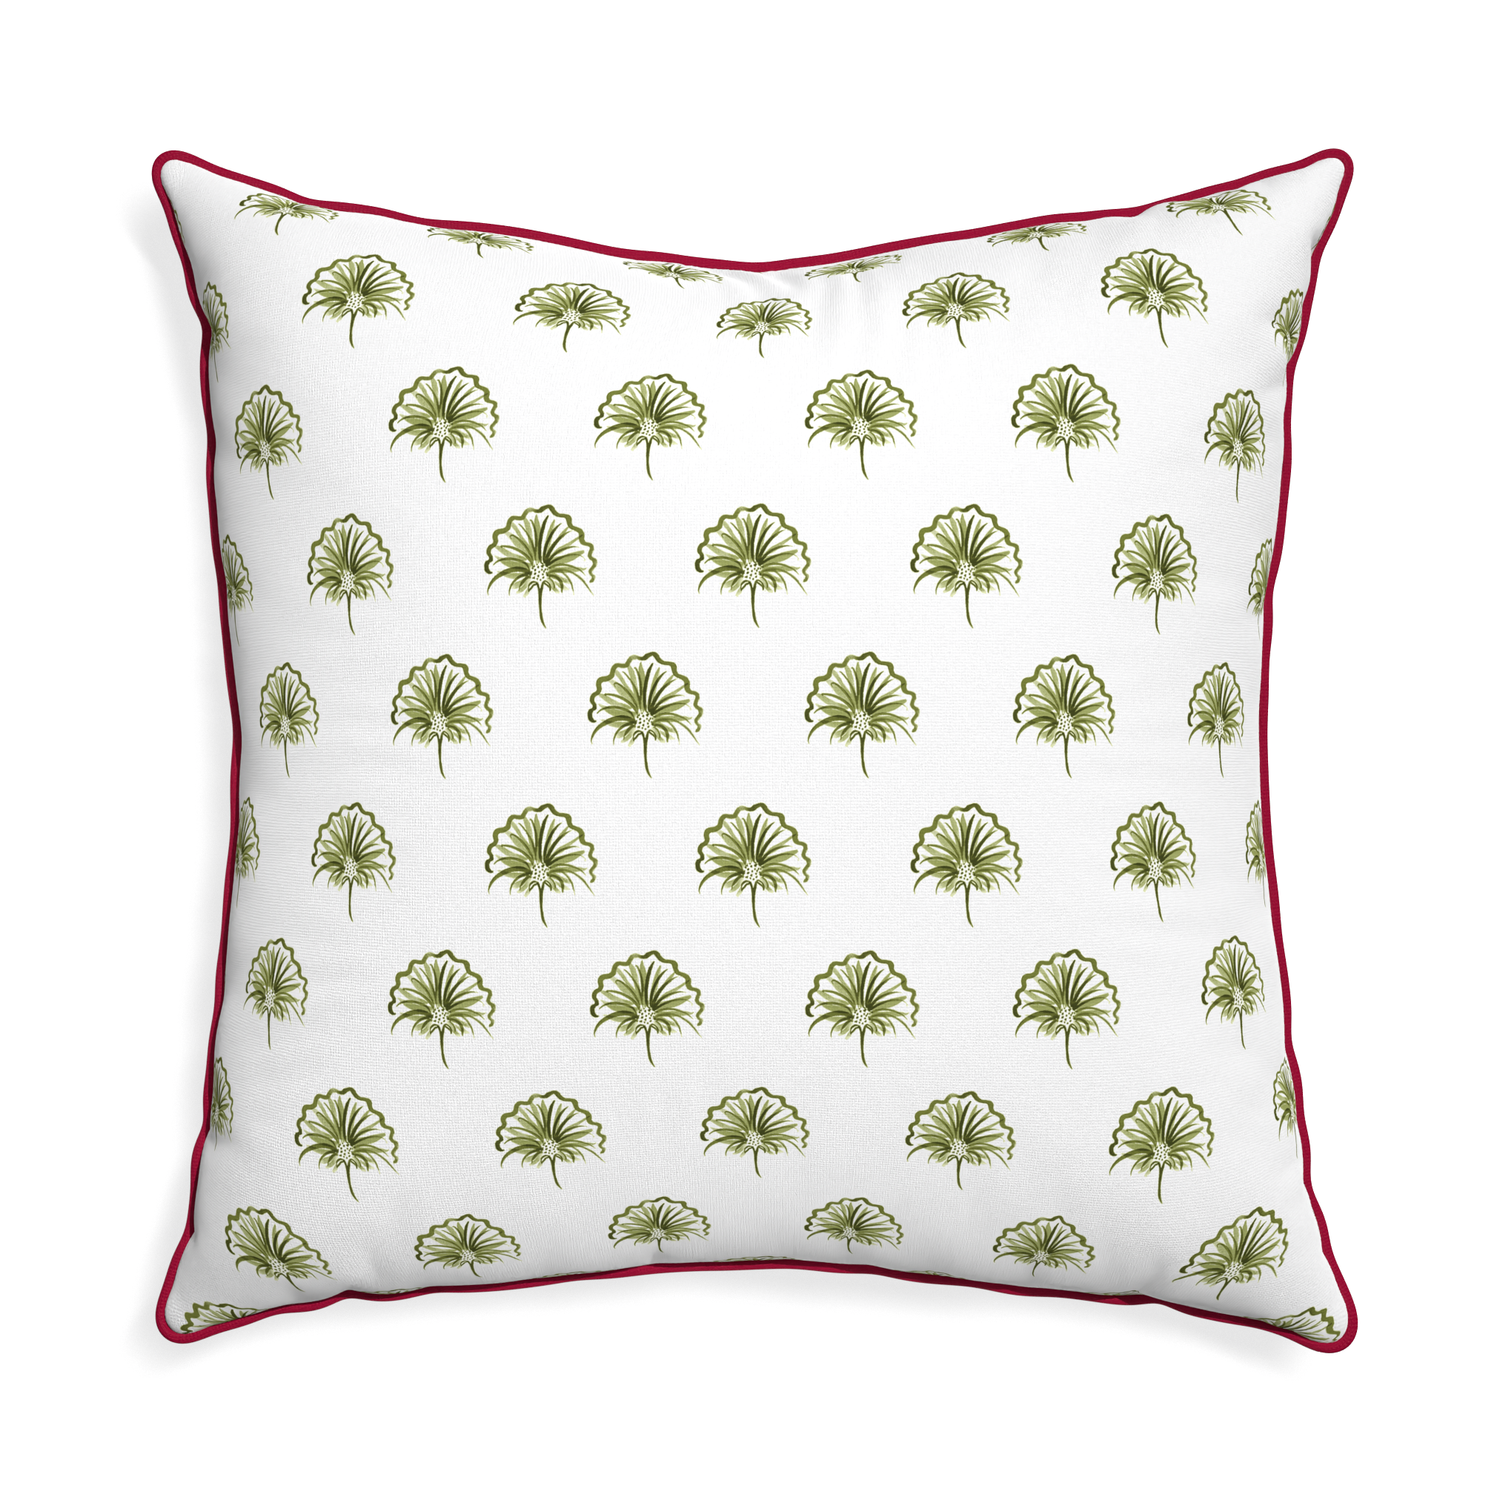 Euro-sham penelope moss custom green floralpillow with raspberry piping on white background